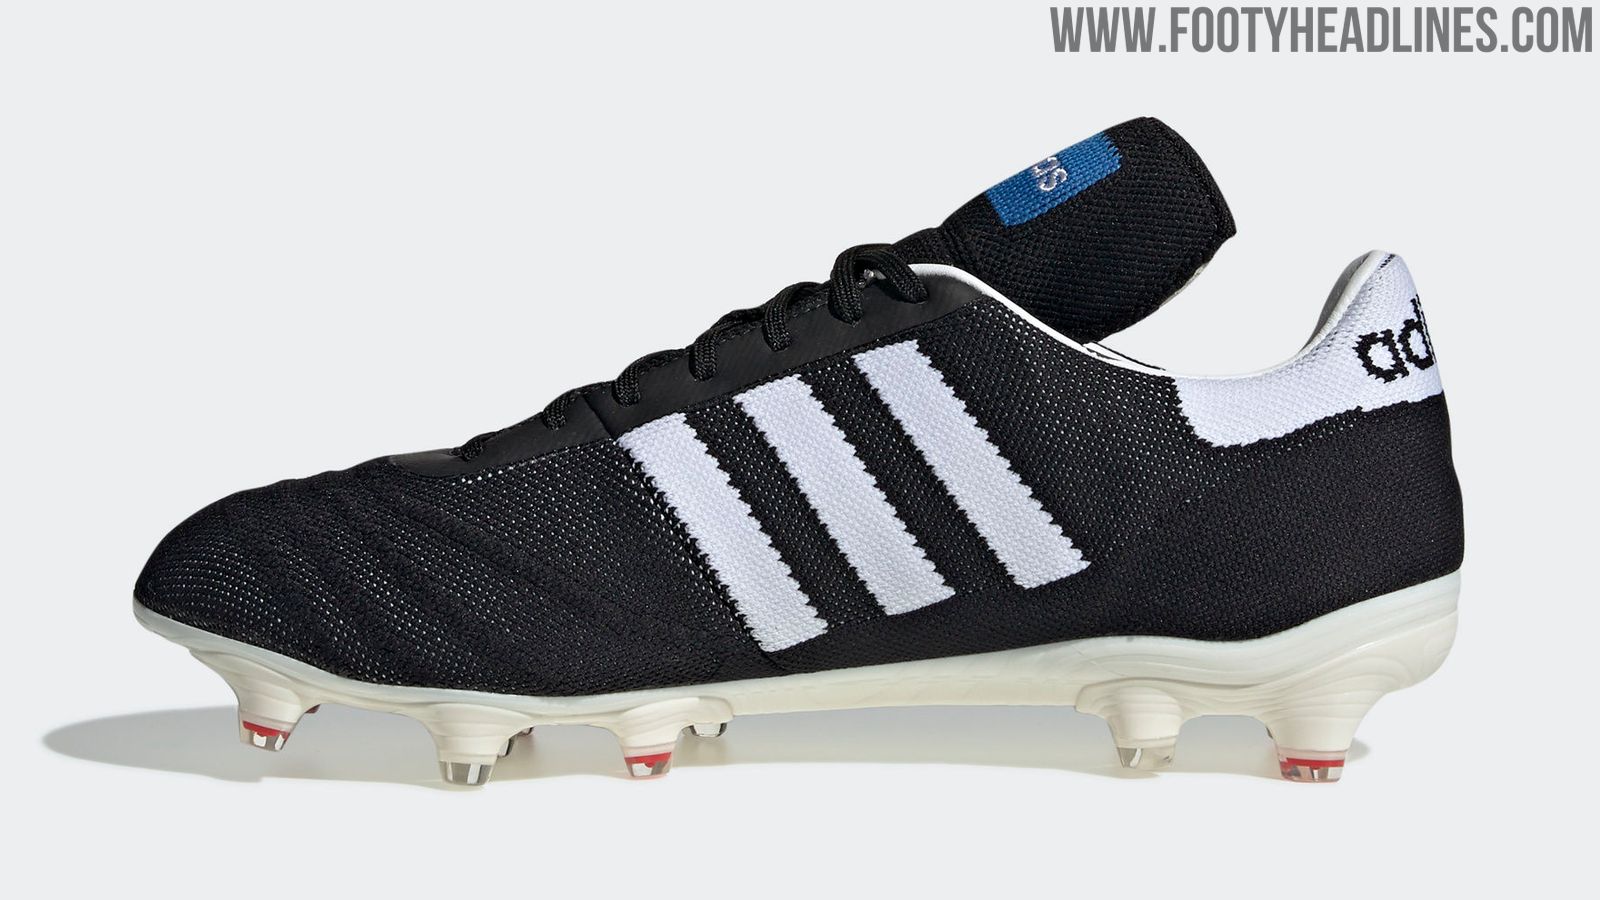 Adidas Football 70 Collection Revealed Footy Headlines